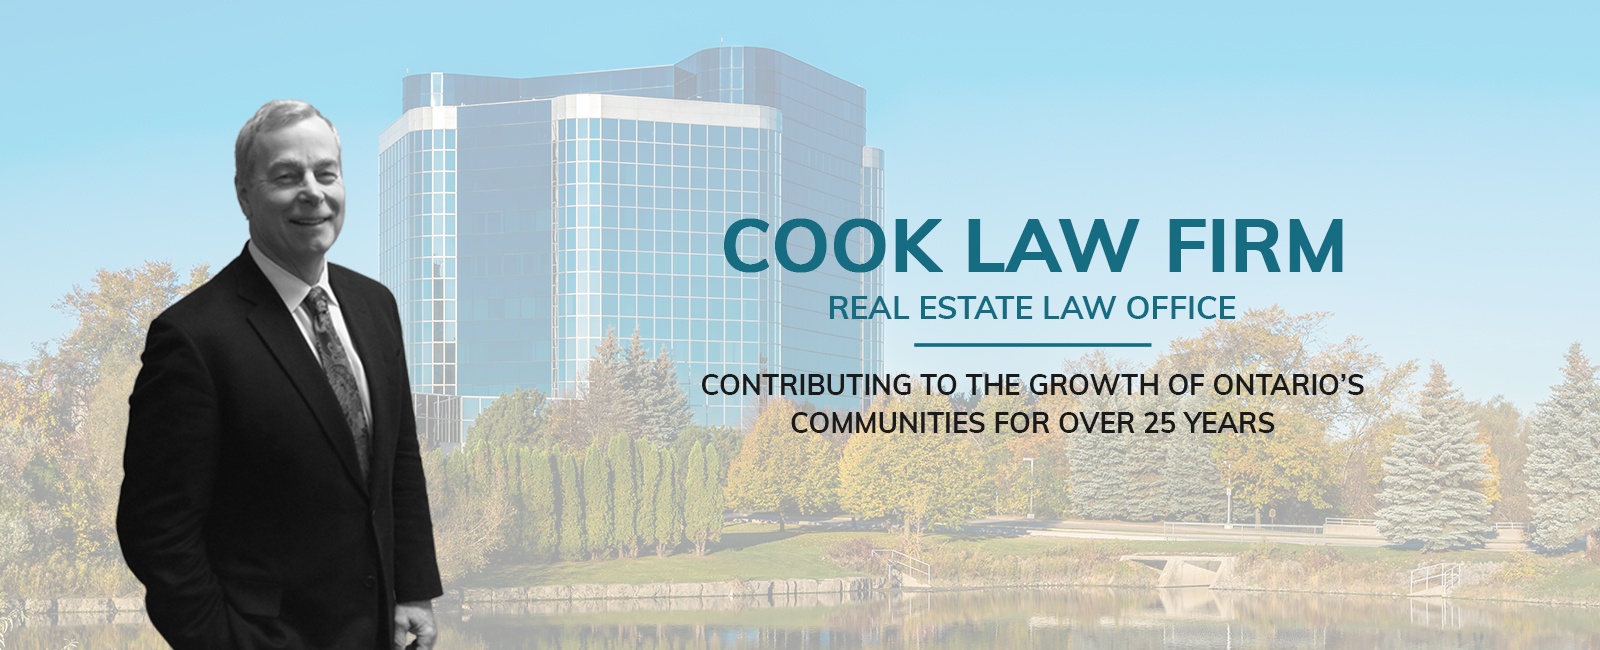 Real Estate Law Firm in Markham